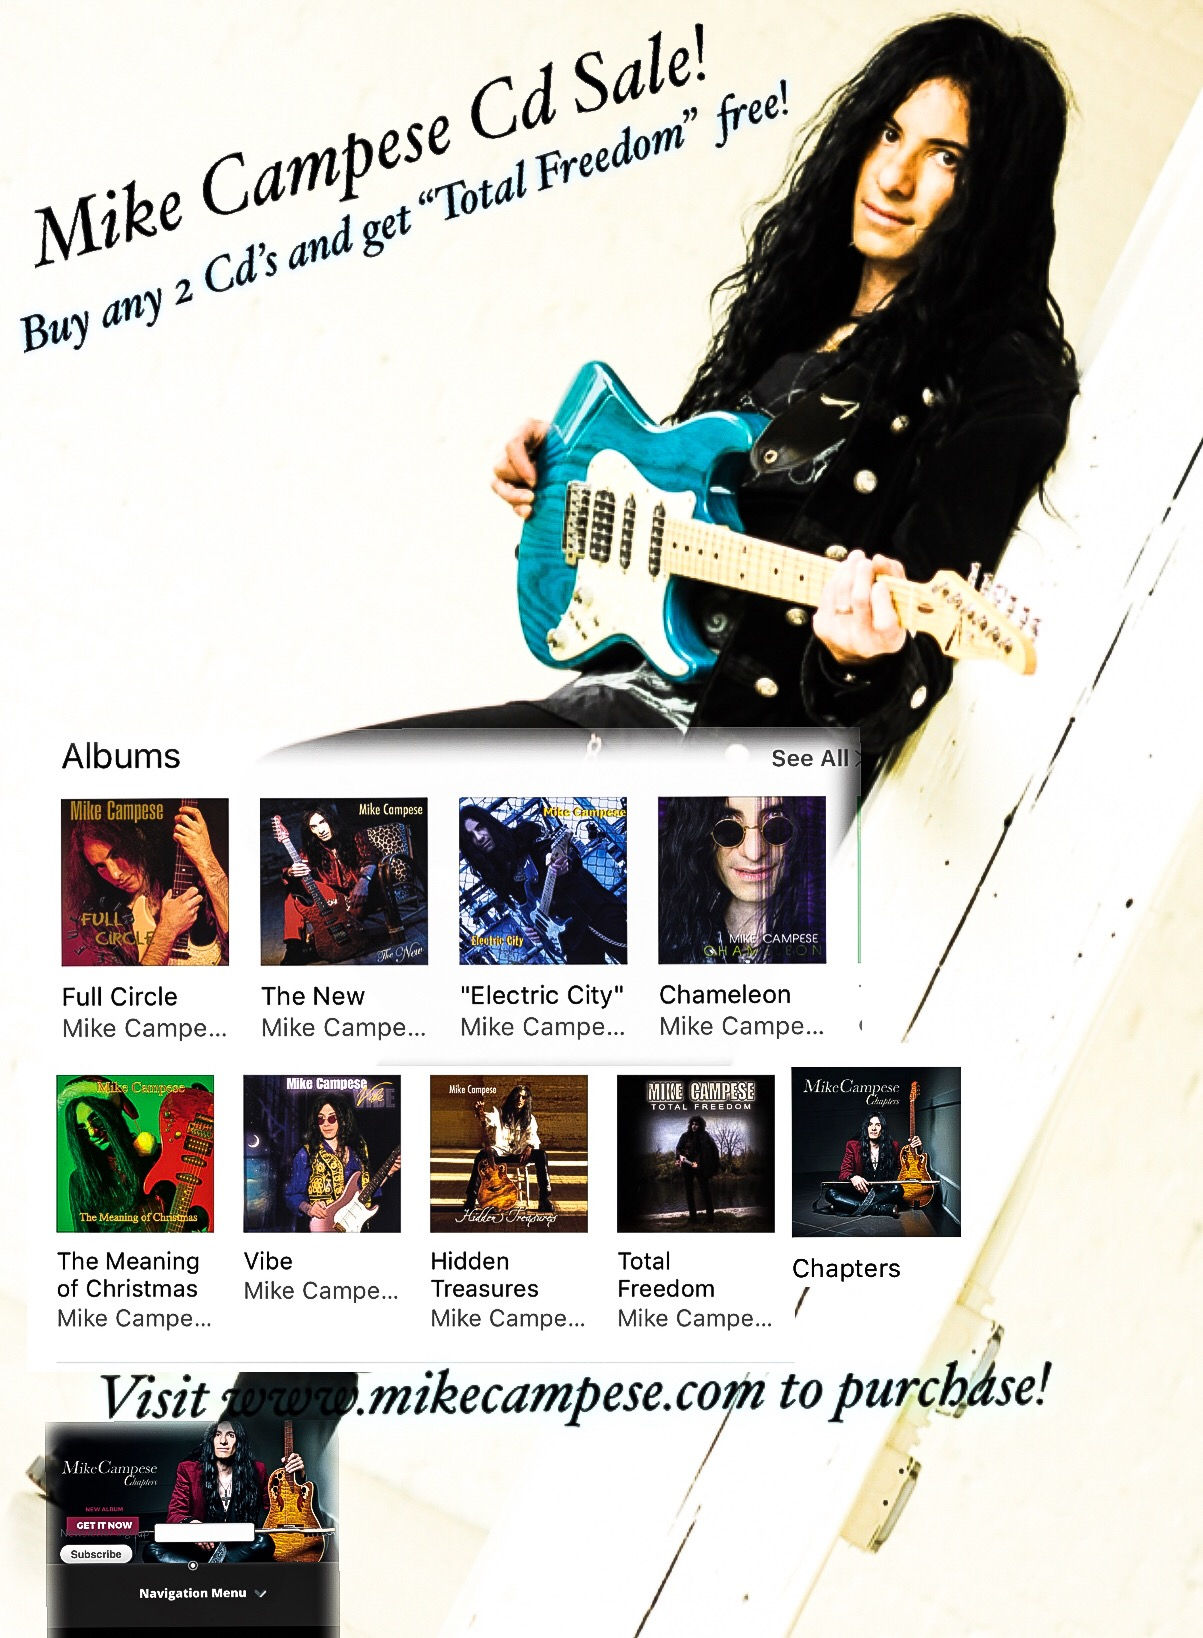 Mike Campese Cd Sale Flyer.